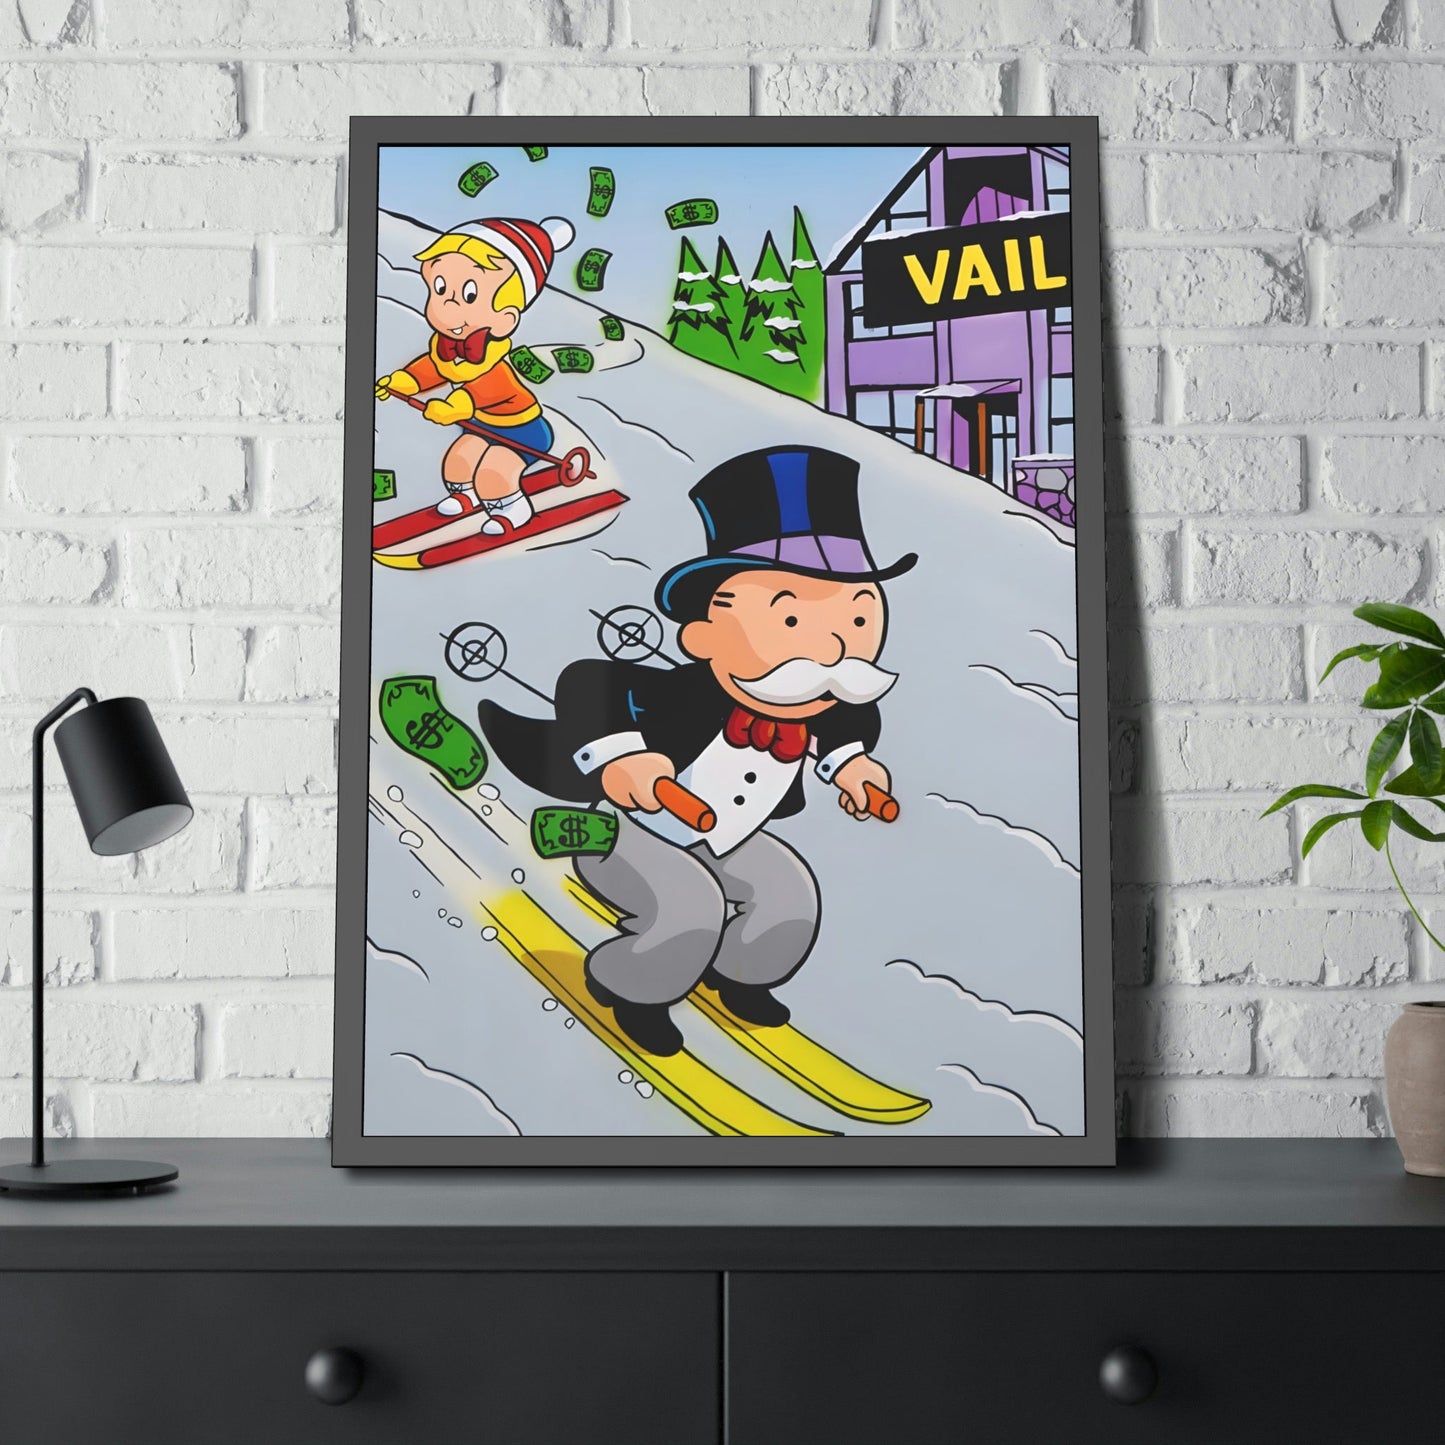 Alec's World: Creative Framed Posters and Canvas Featuring Alec Monopoly's